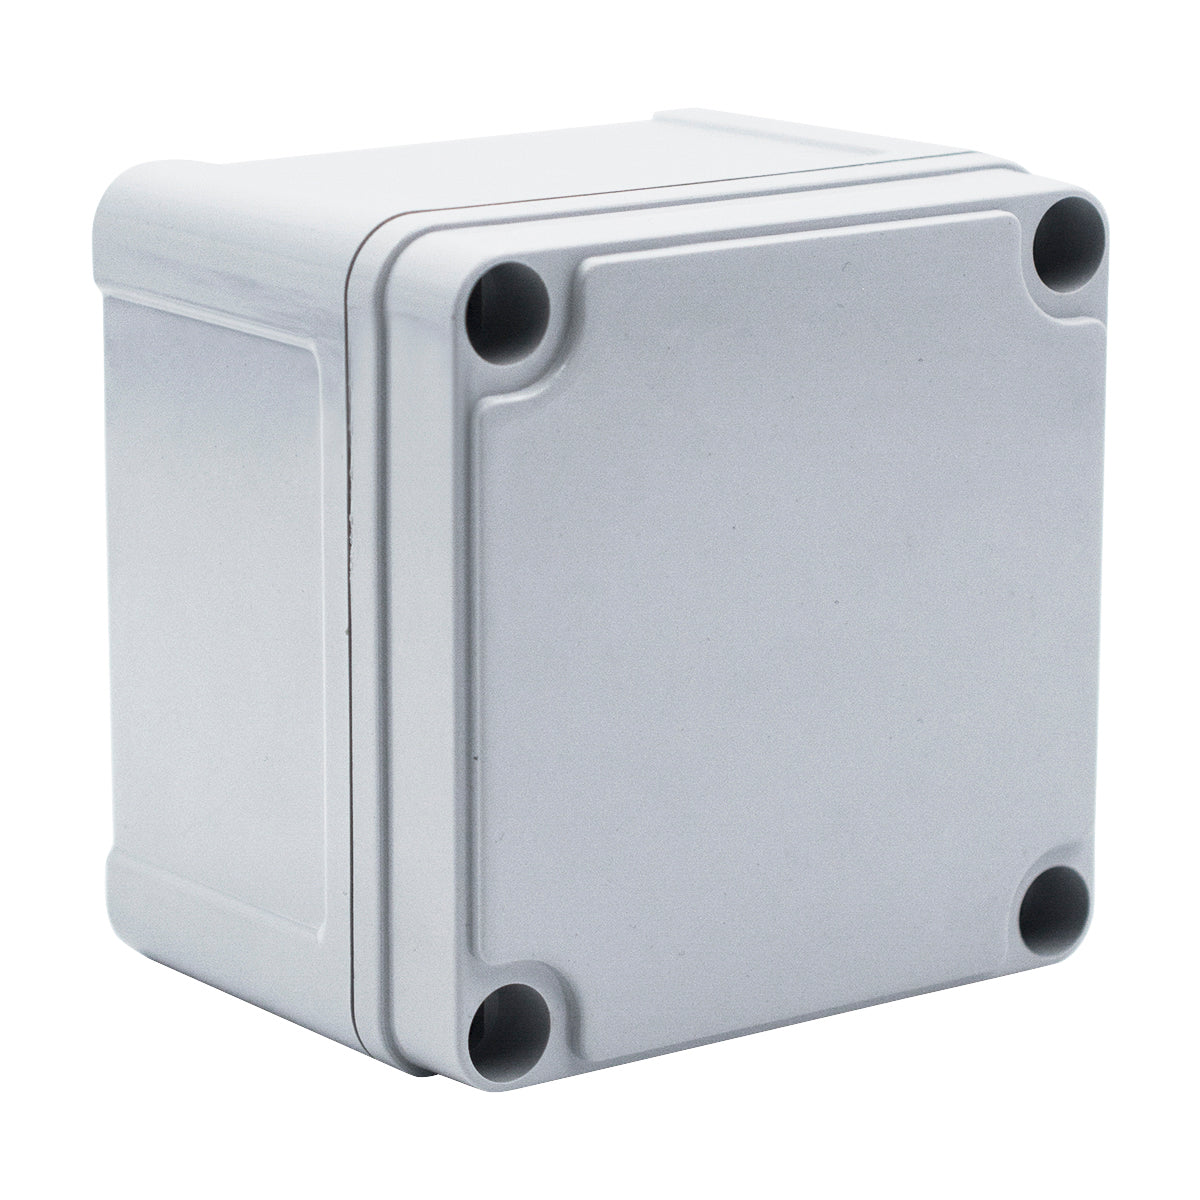 ABS Plastic Electrical Junction Box Case Waterproof Plastic Box 10x10x7.5 cm-simplybuy industrial